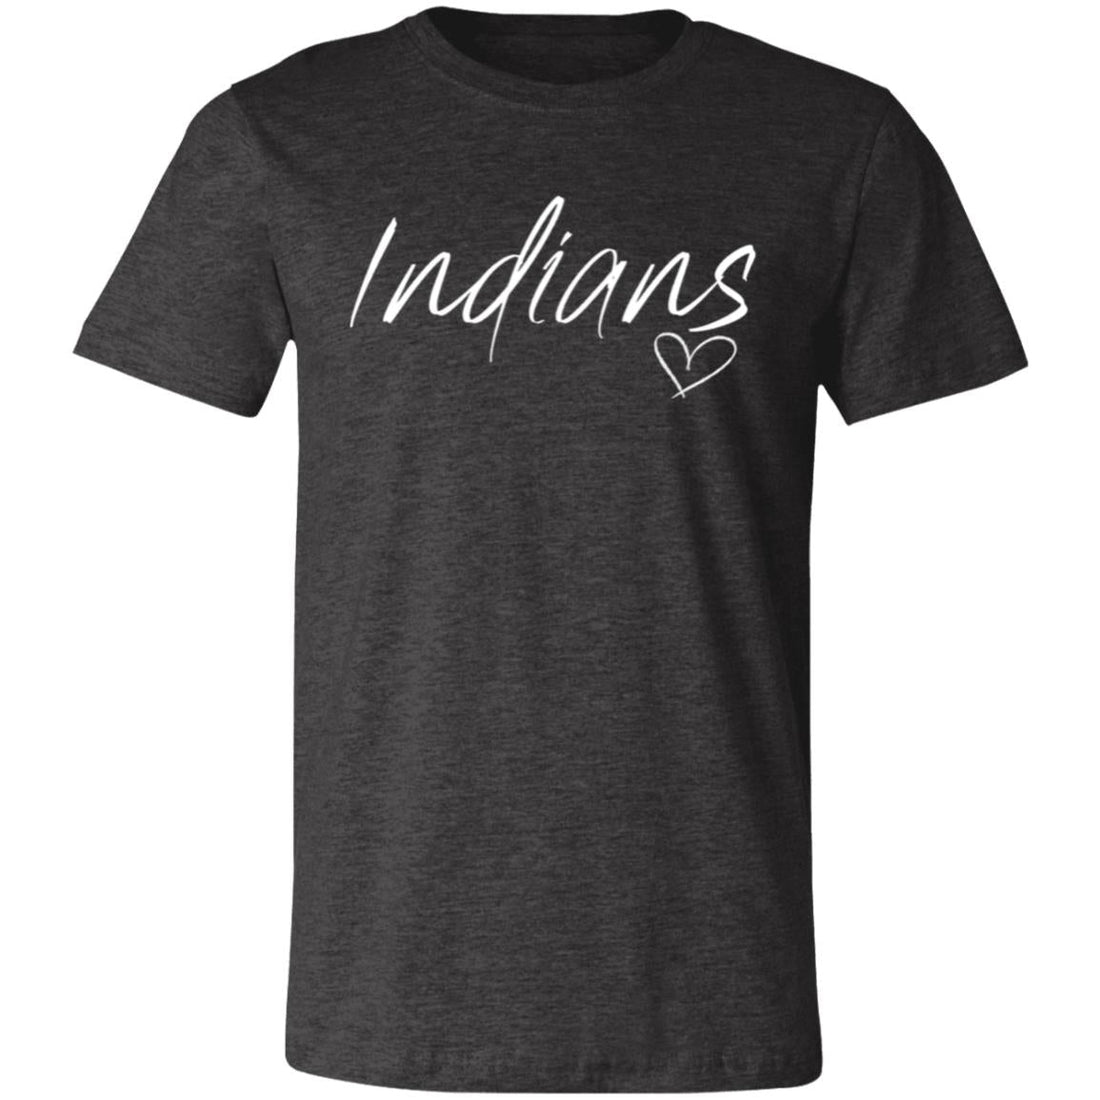 Indians Heart T-Shirt - T-Shirts - Positively Sassy - Indians Heart T-Shirt